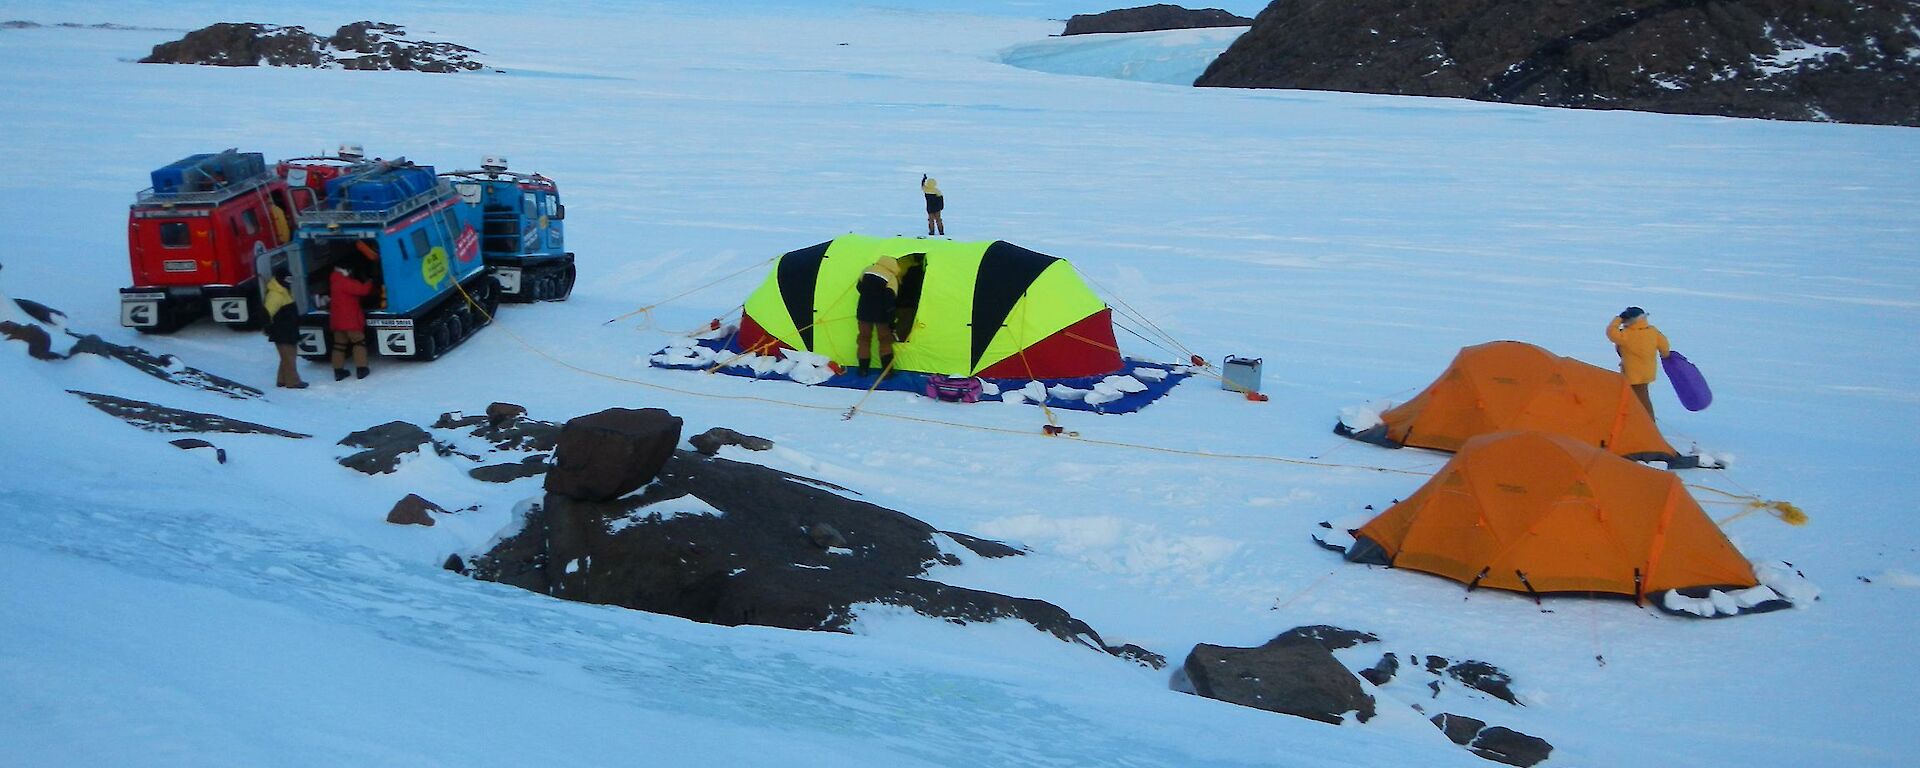 The campground, with the red and blue Hägglunds vehicles parked on the left and fluorescent striped oval shaped Endurance tent is in the middle of the two orange Polar Dome tents on the right.